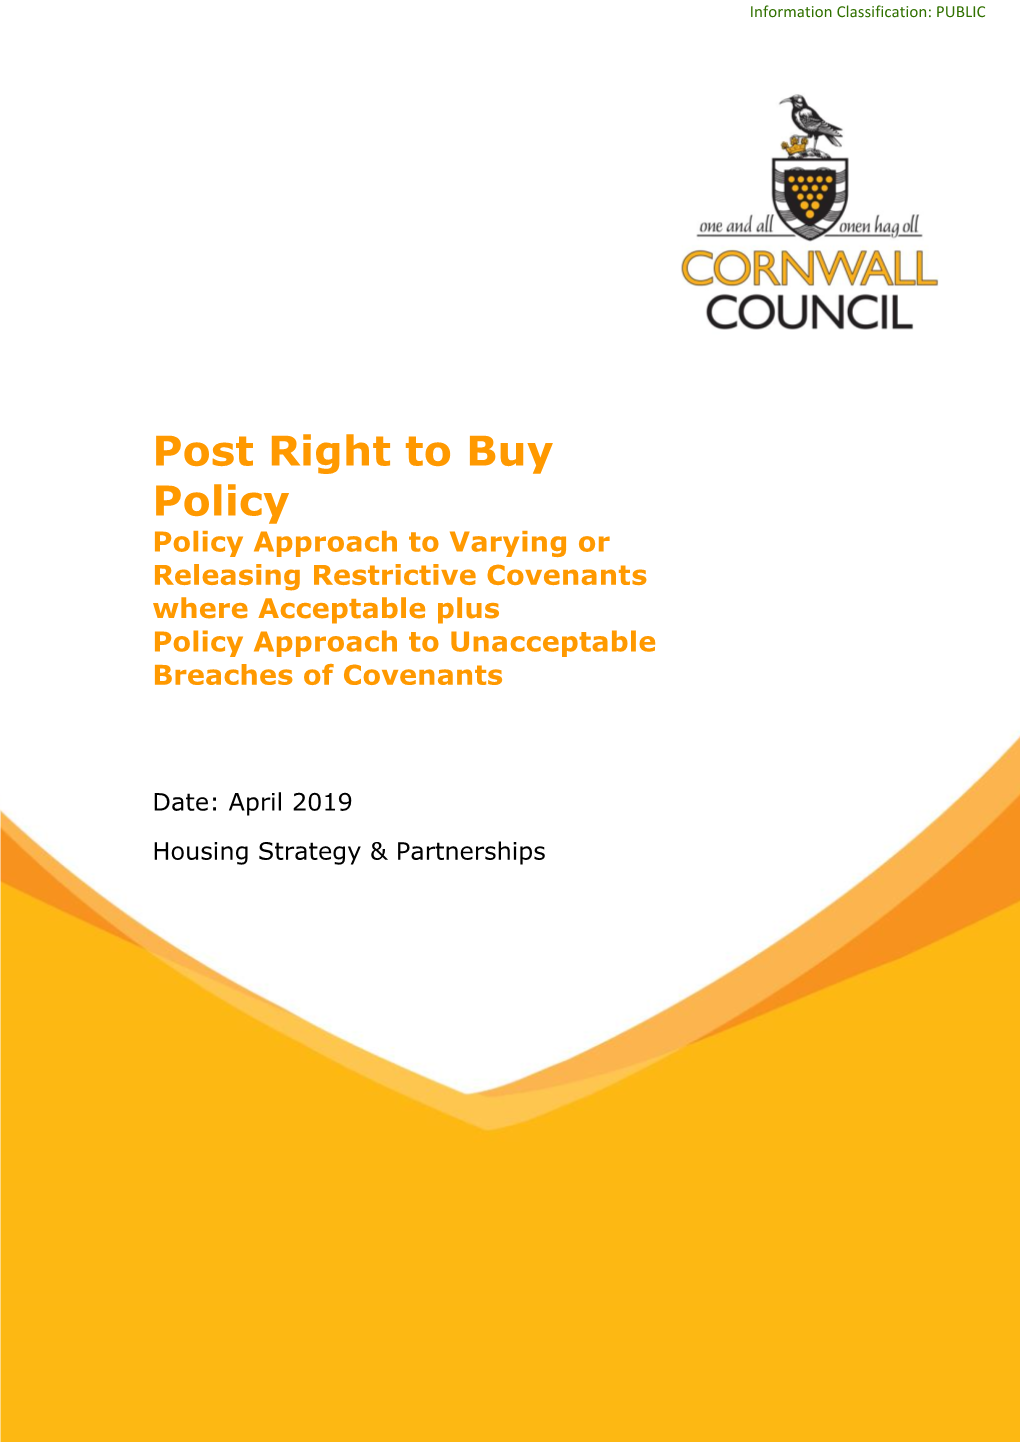 Post Right to Buy Policy Policy Approach to Varying Or Releasing Restrictive Covenants Where Acceptable Plus Policy Approach to Unacceptable Breaches of Covenants